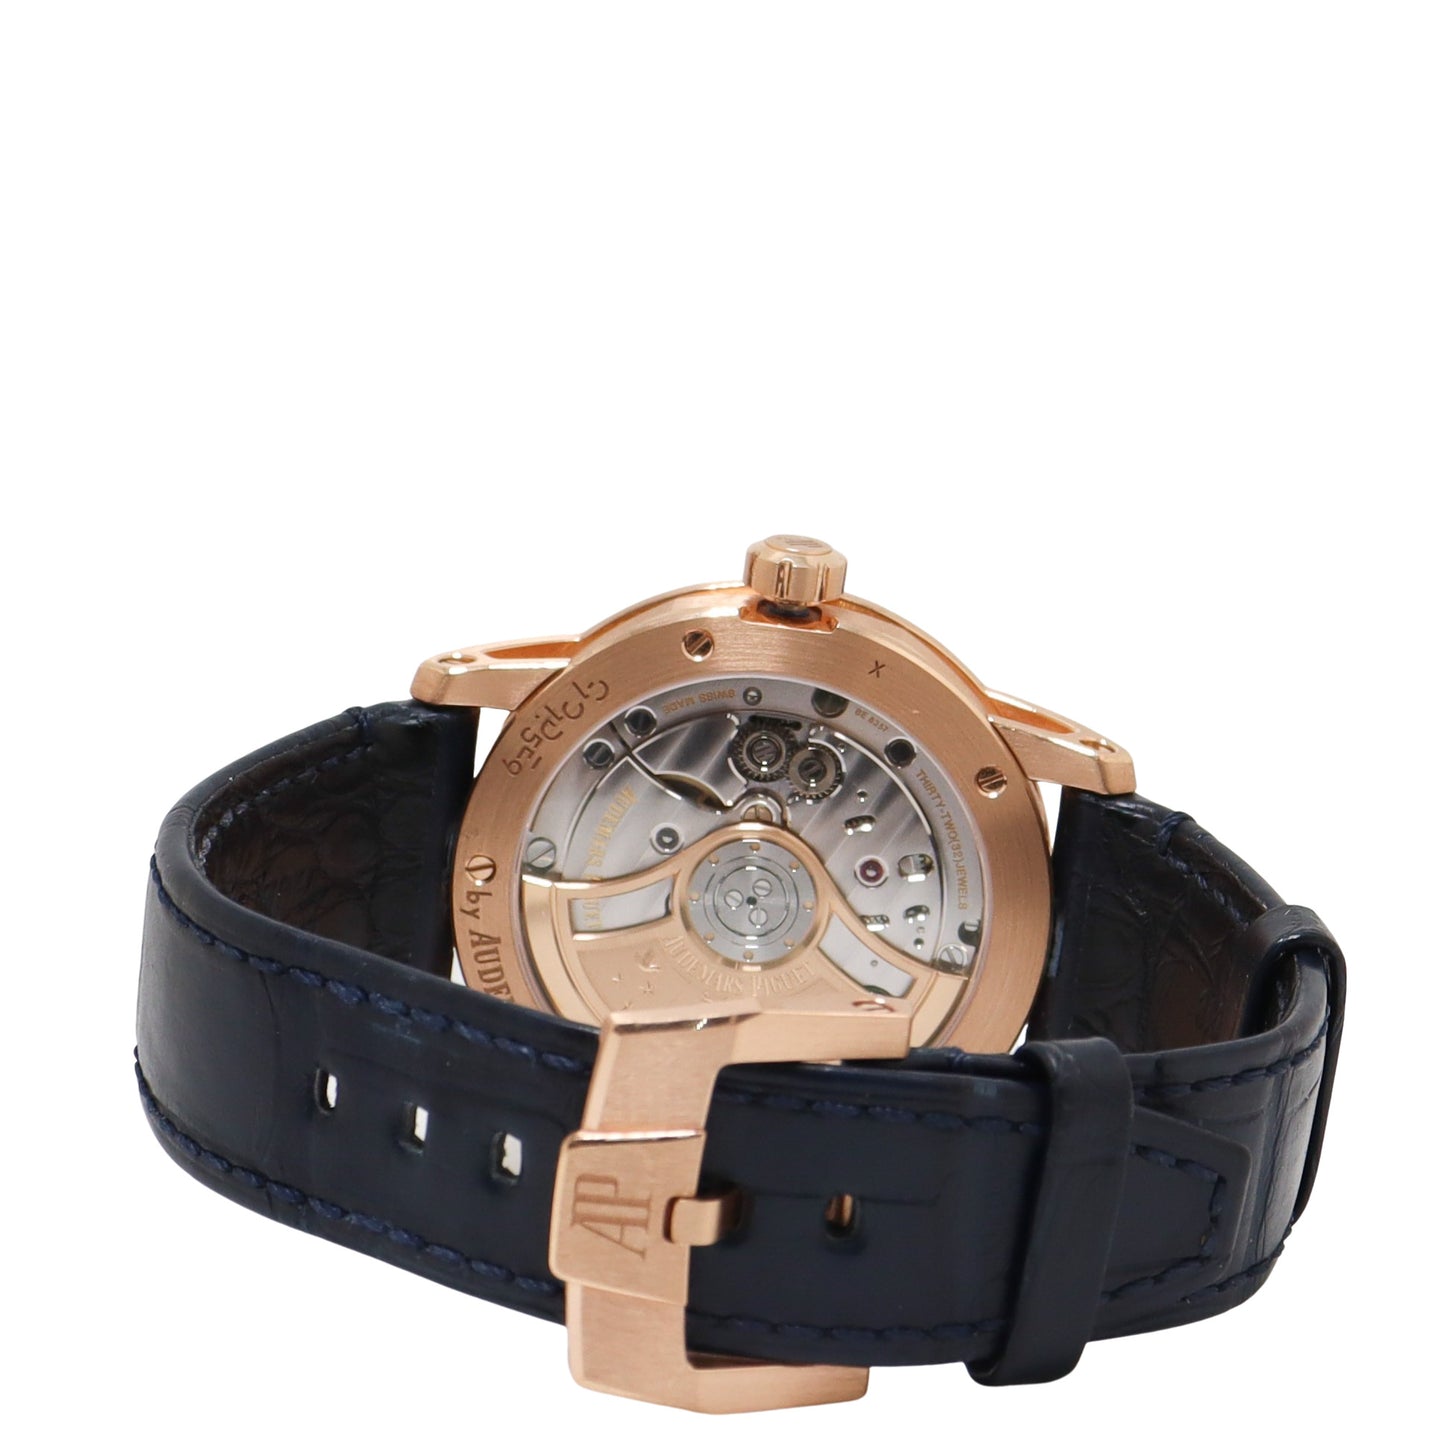 Audemars Piguet Code 11.59 Rose Gold 41mm Blue Arabic & Stick Dial Watch Reference# 15210OR.OO.A028CR.01